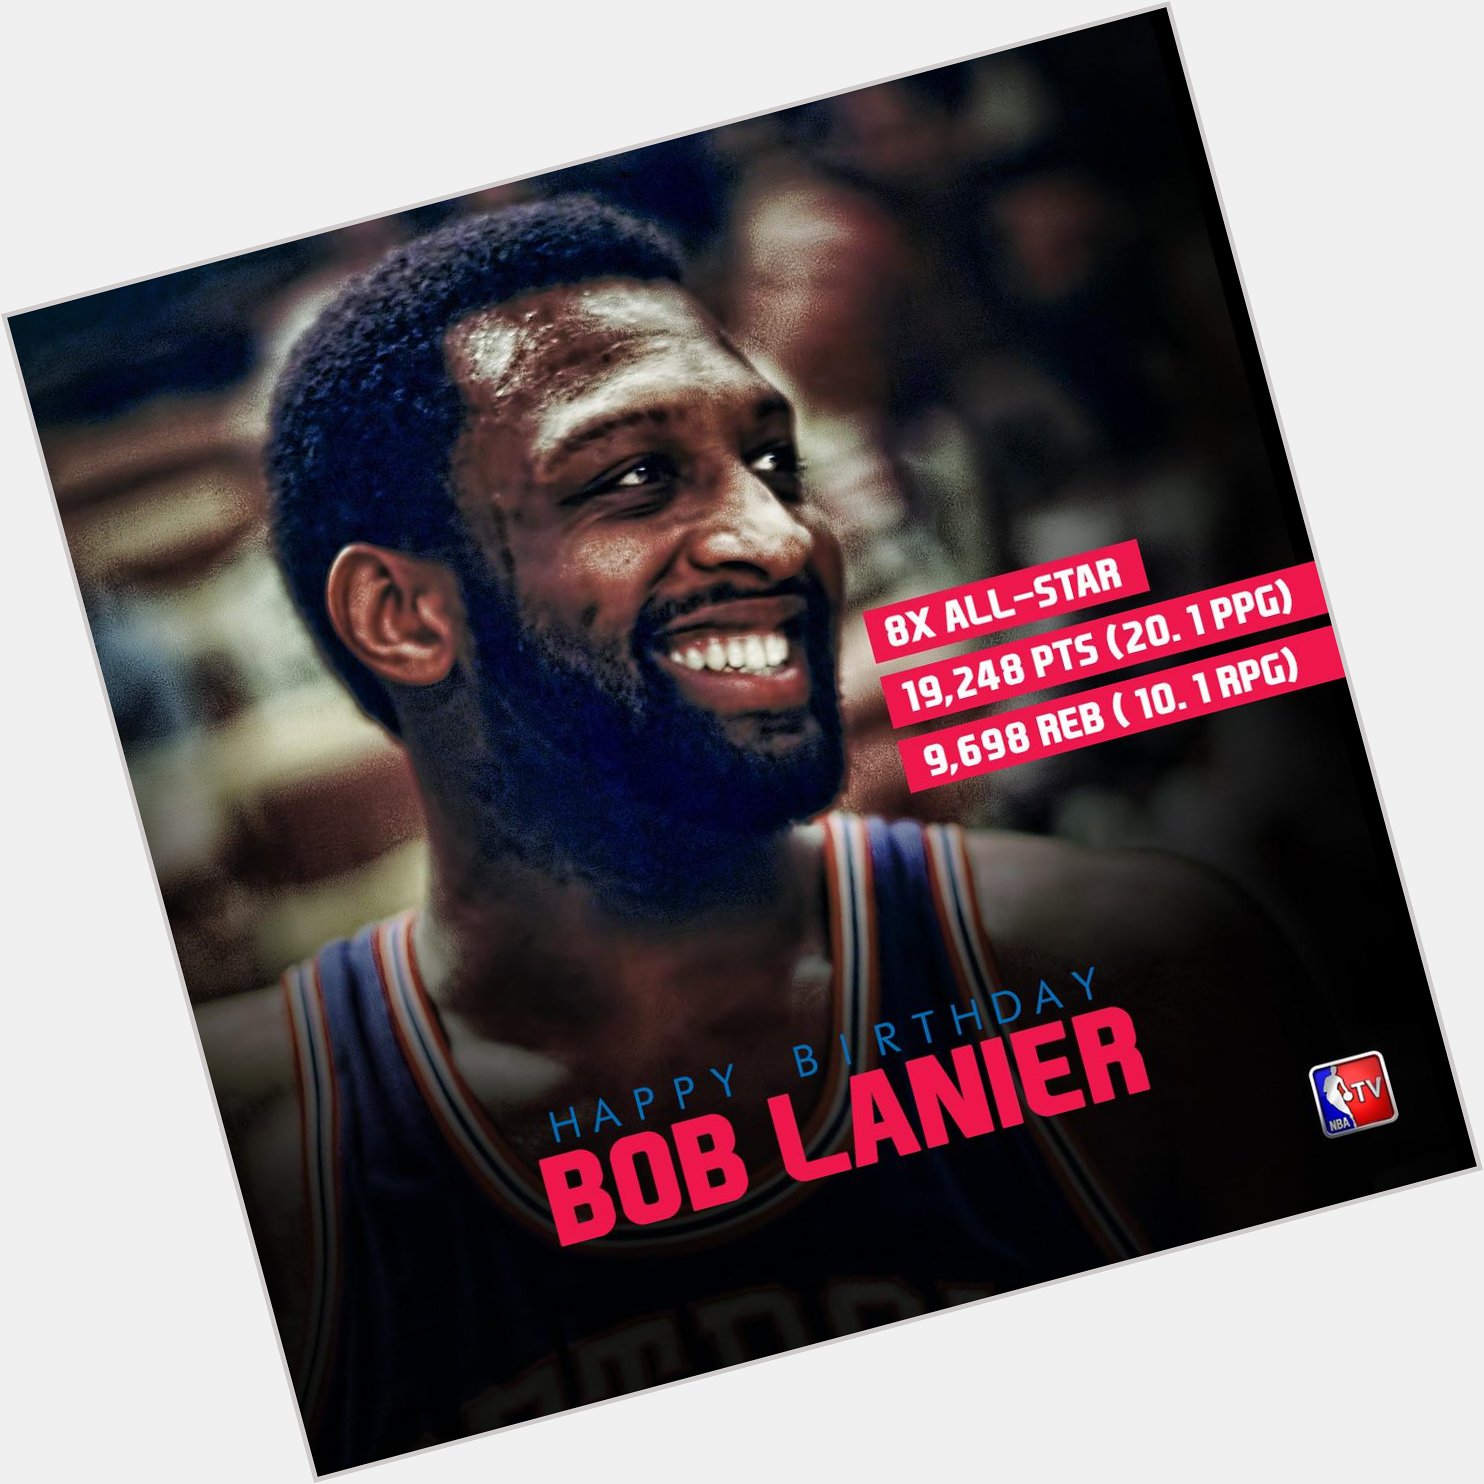 Happy Birthday to another legend, Bob Lanier! The 1970 No. 1 pick turns 67 today. 